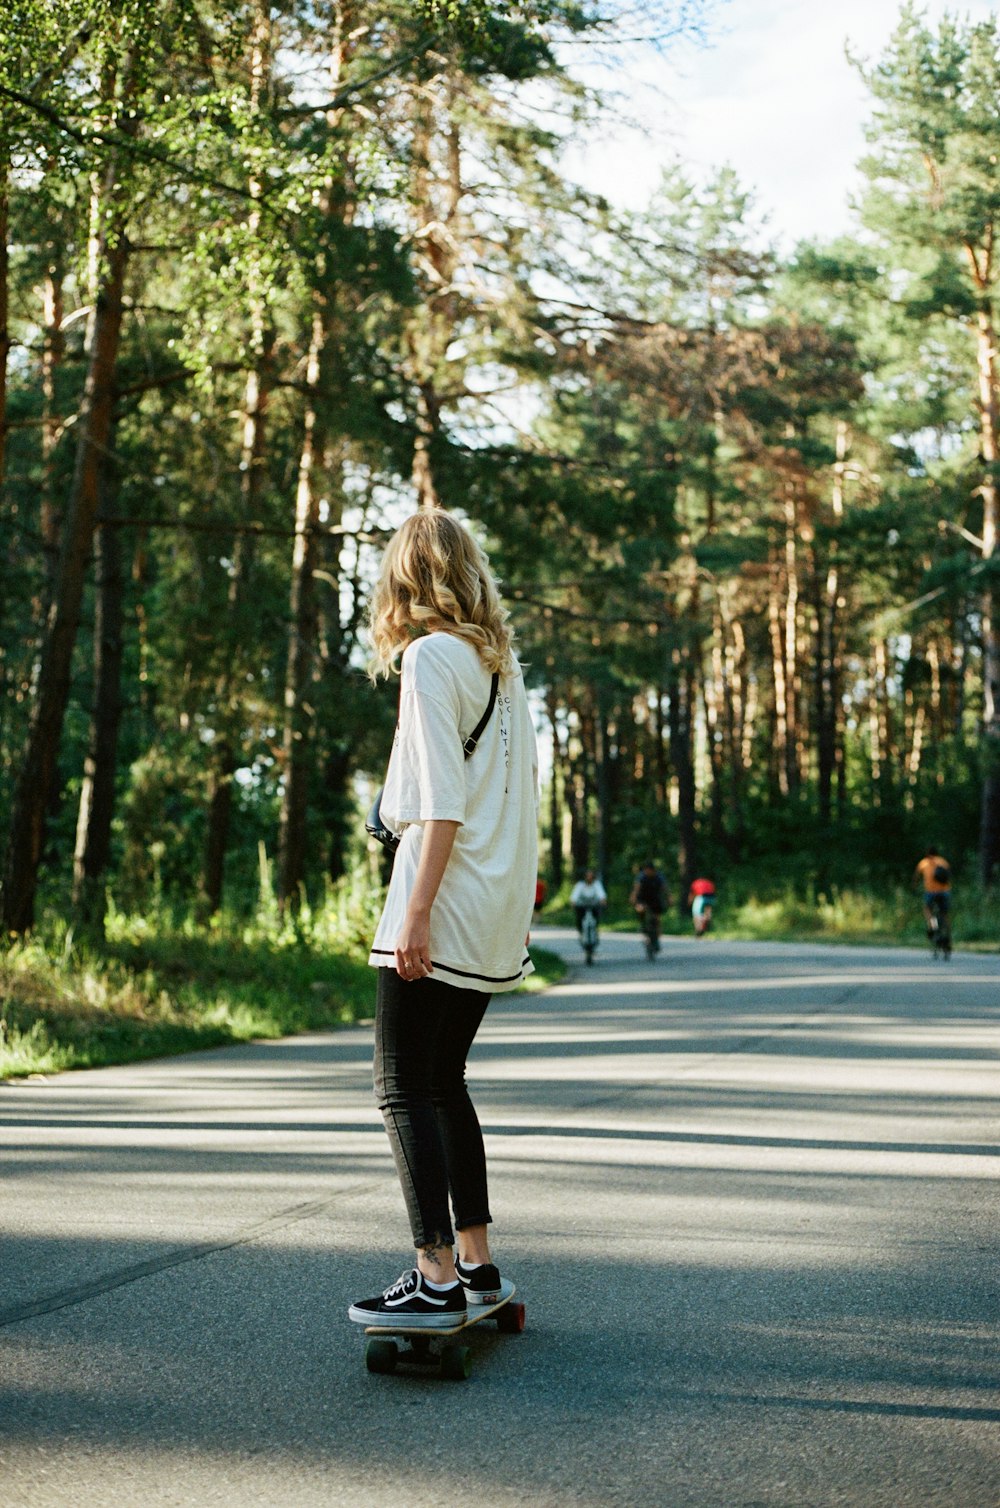 woman in white long sleeve shirt and black pants walking on road during daytime